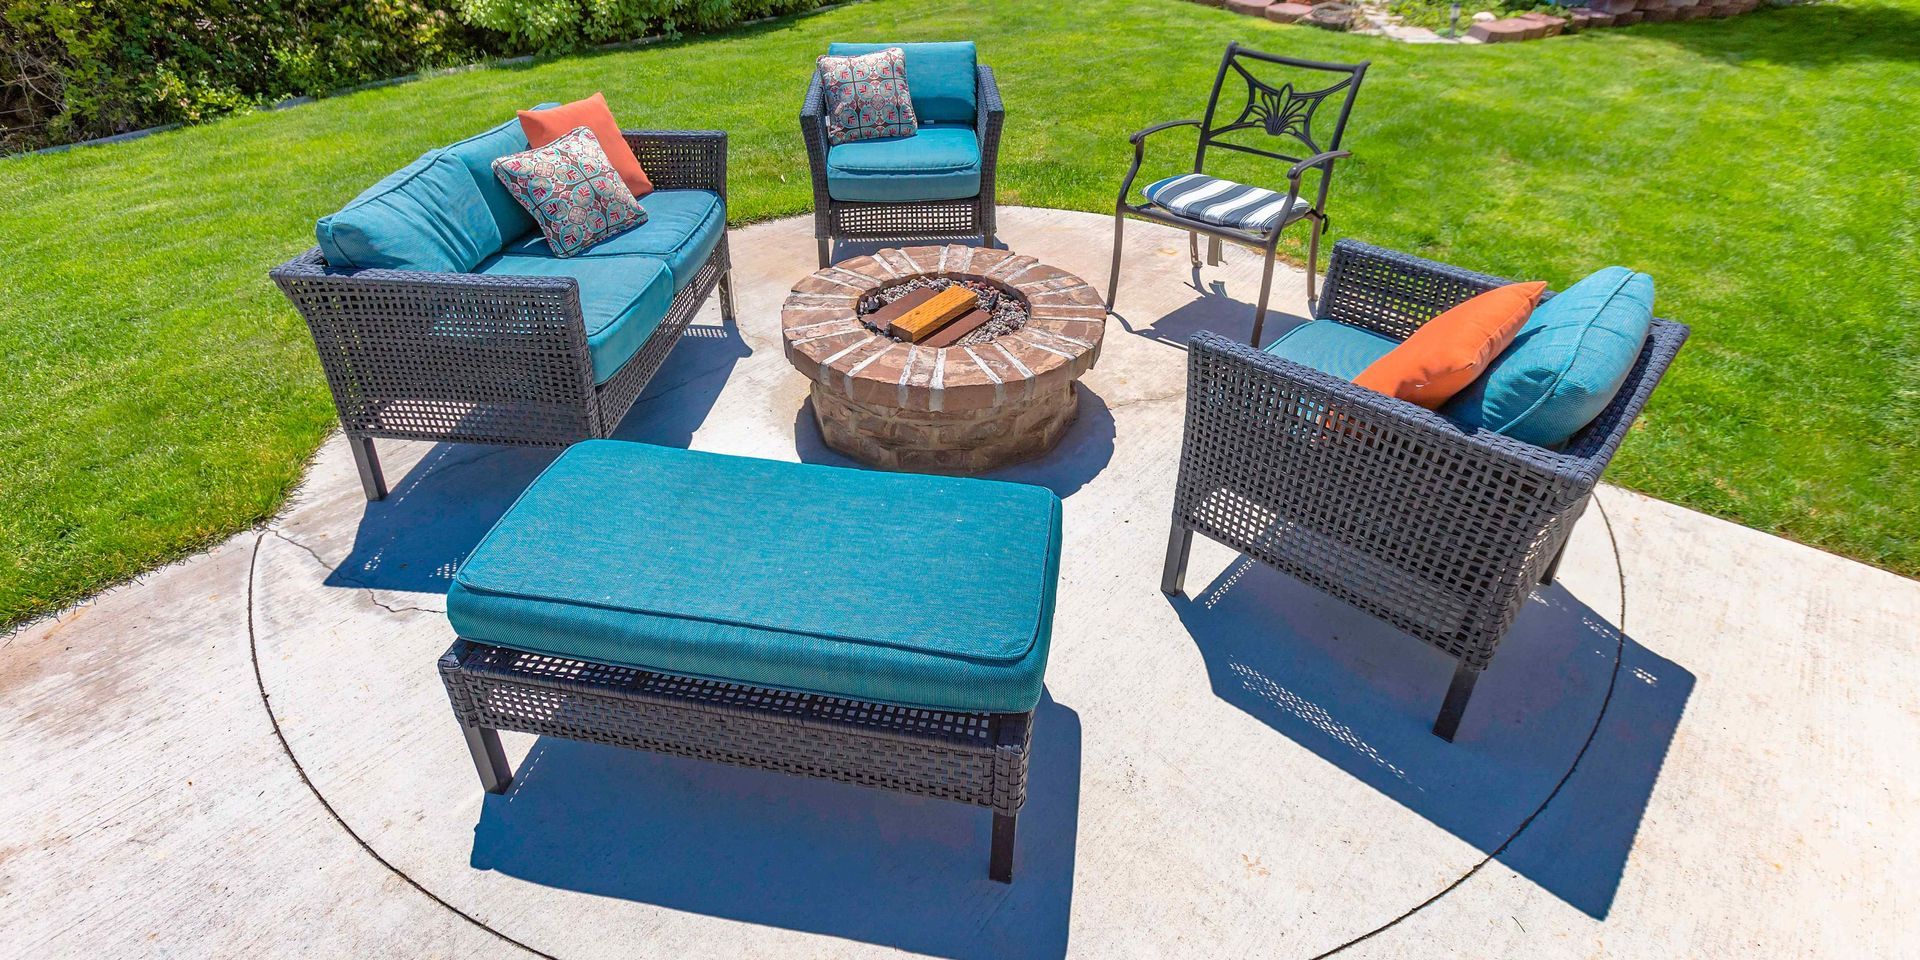 Chairs surrounding a brick fire pit as part of an outdoor living space